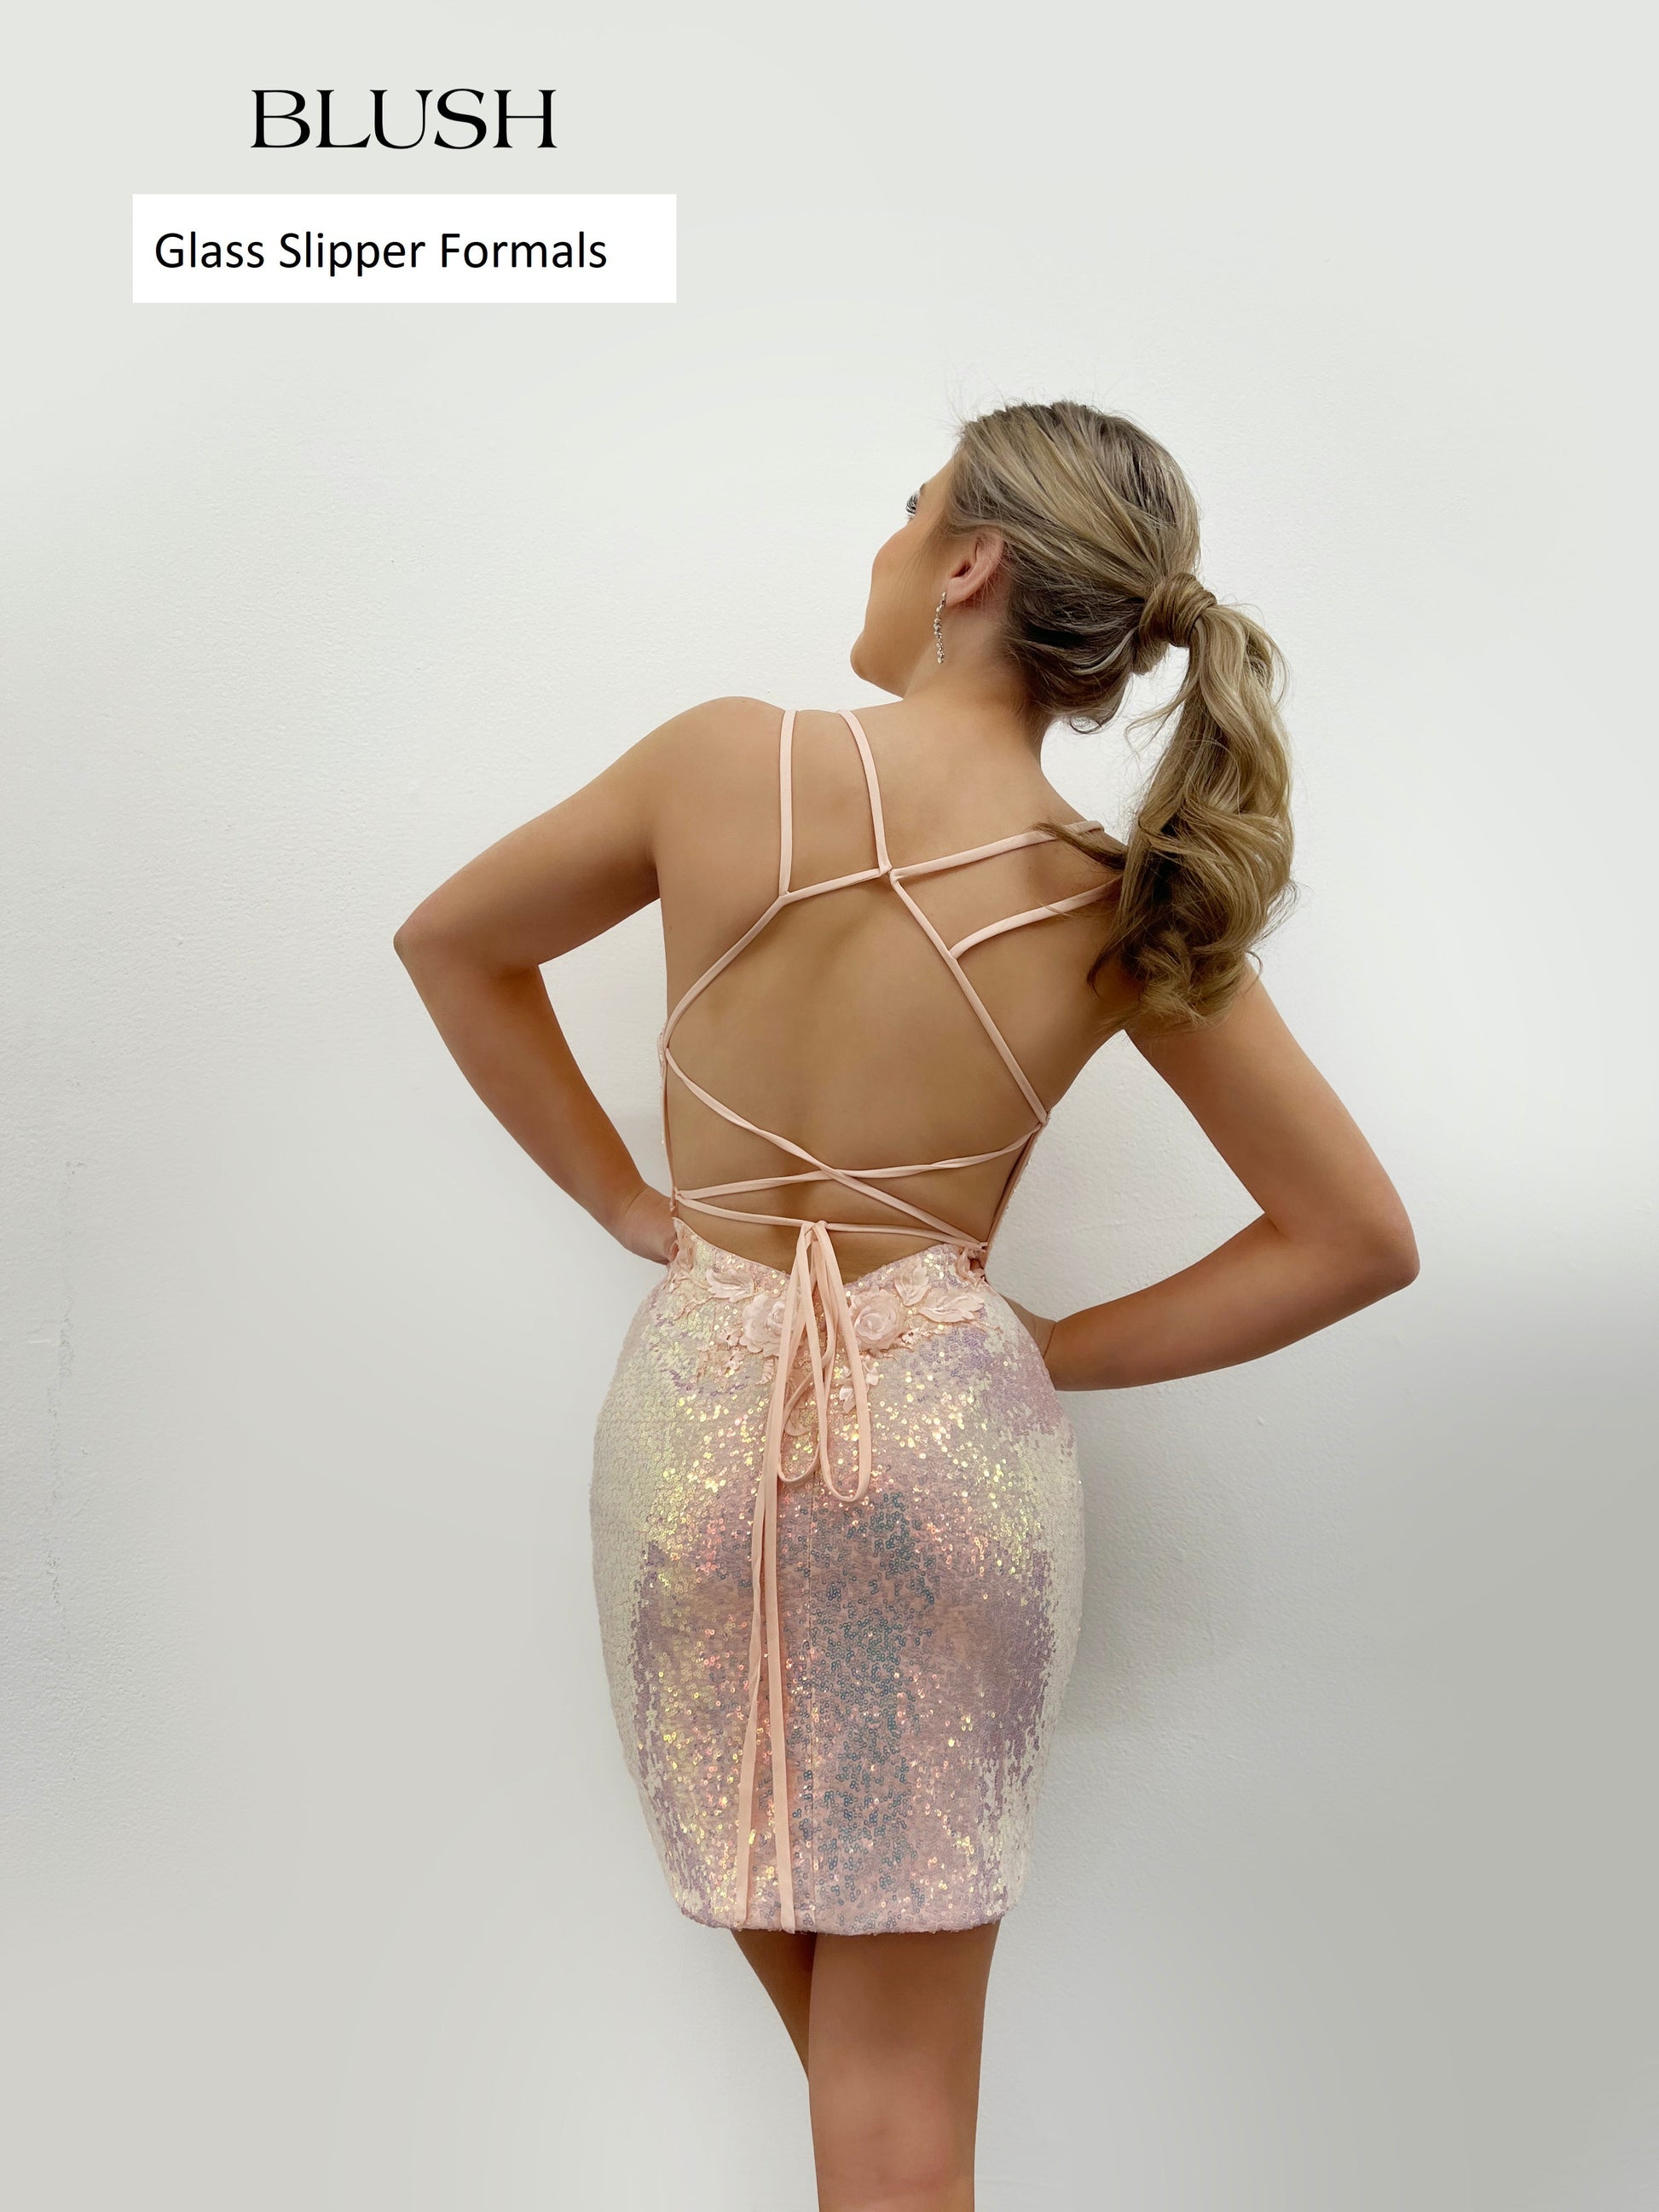 Blush Prom 20413 is a short Short Fitted Sequin Cocktail Dress with 3D Flower accents along the bodice. This Formal Backless Gown Features a criss cross spaghetti strap pattern in the back. Slit in skirt Available Sizes: 0-24  Available Colors: AB/White, Blush, Hot Pink